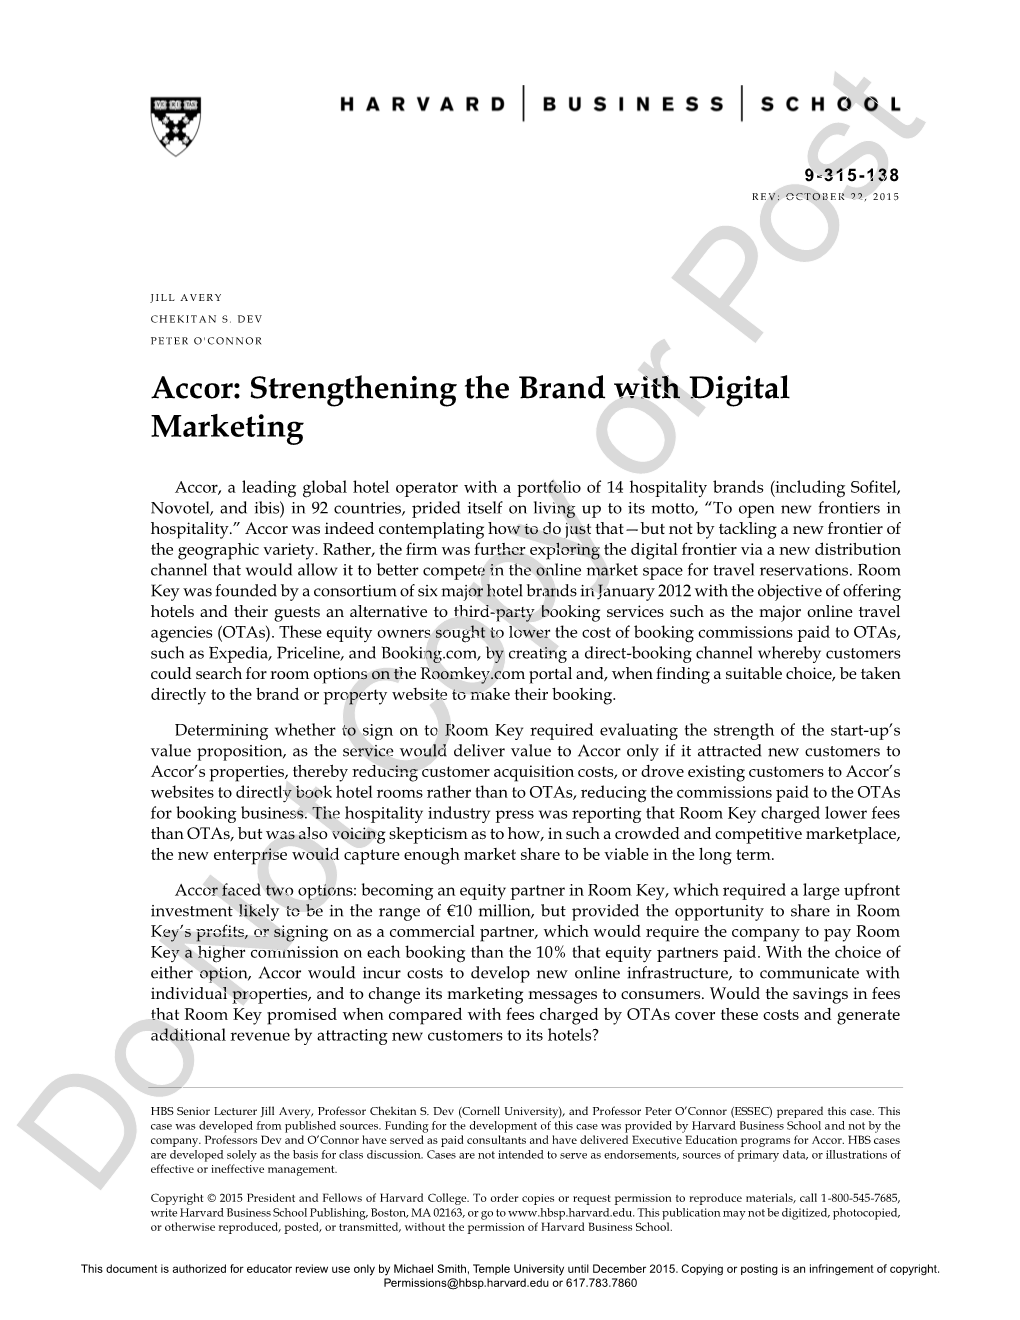 Accor: Strengthening the Brand with Digital Marketing